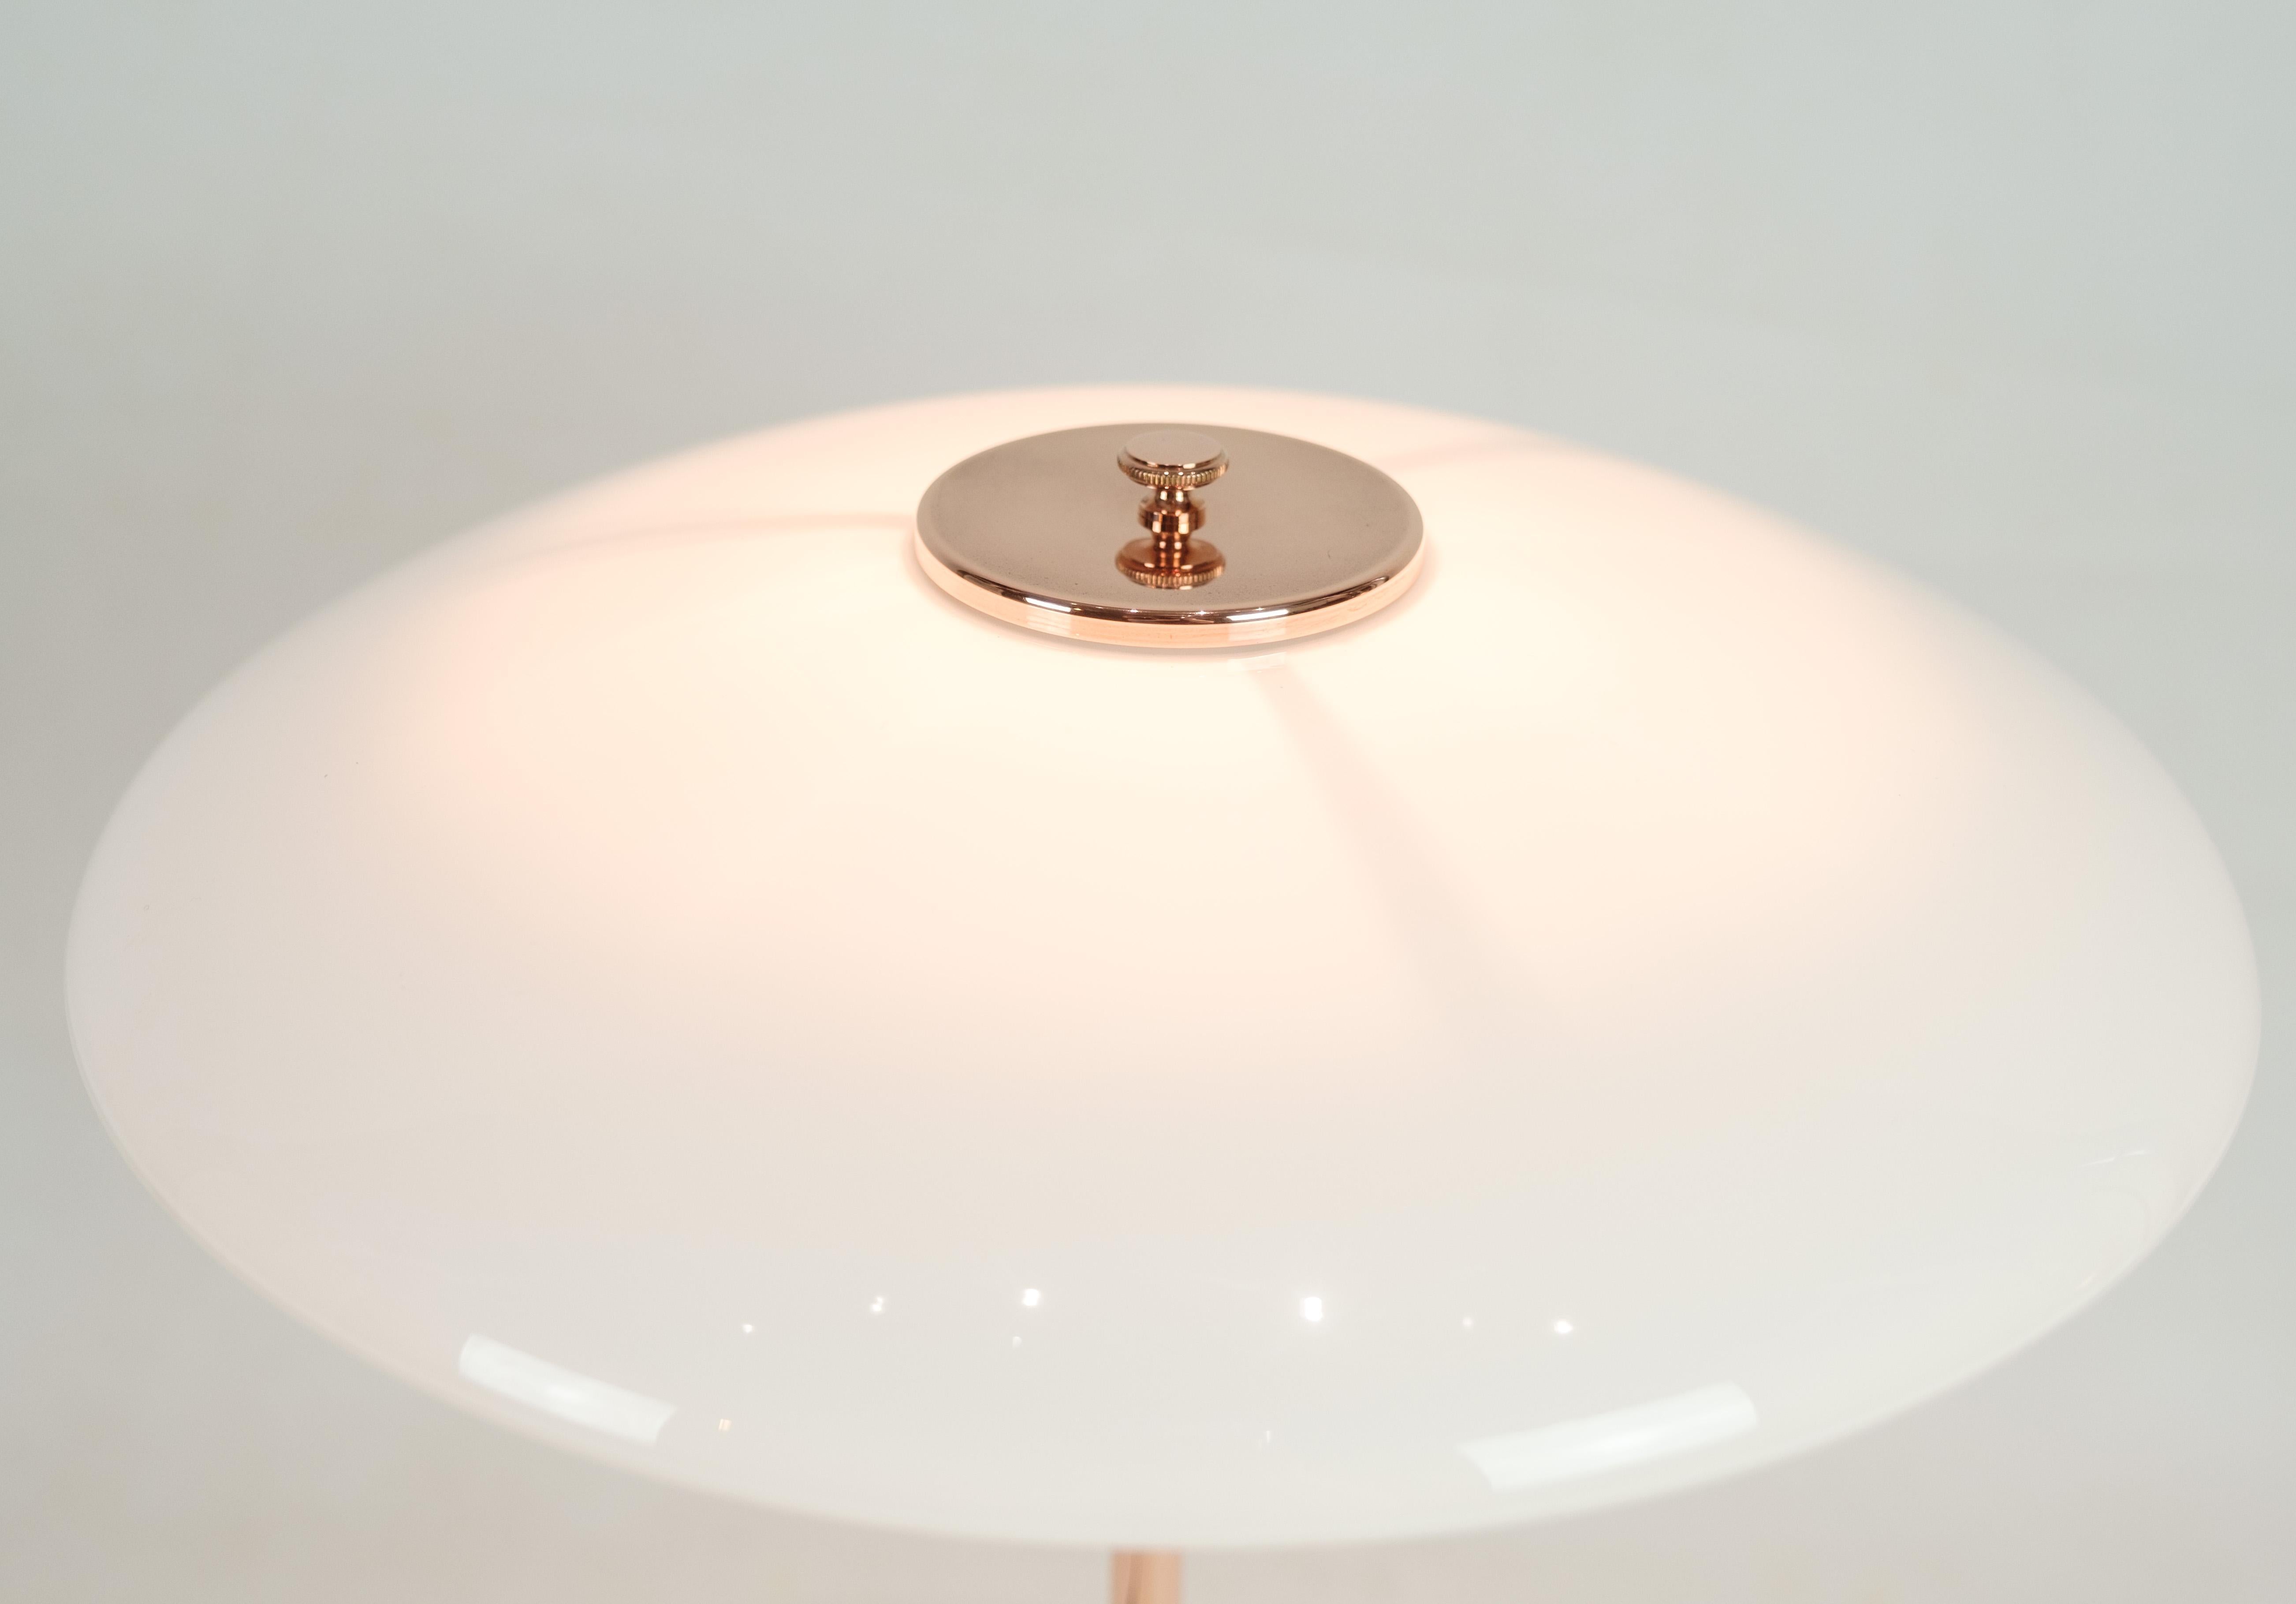 PH Table lamp, model PH3½-2½, is a limited edition designed by Poul Henningsen and manufactured by Louis Poulsen. This lamp, made of copper, has an upper shade in copper and two lower shades in white opal glass. An additional upper screen in white